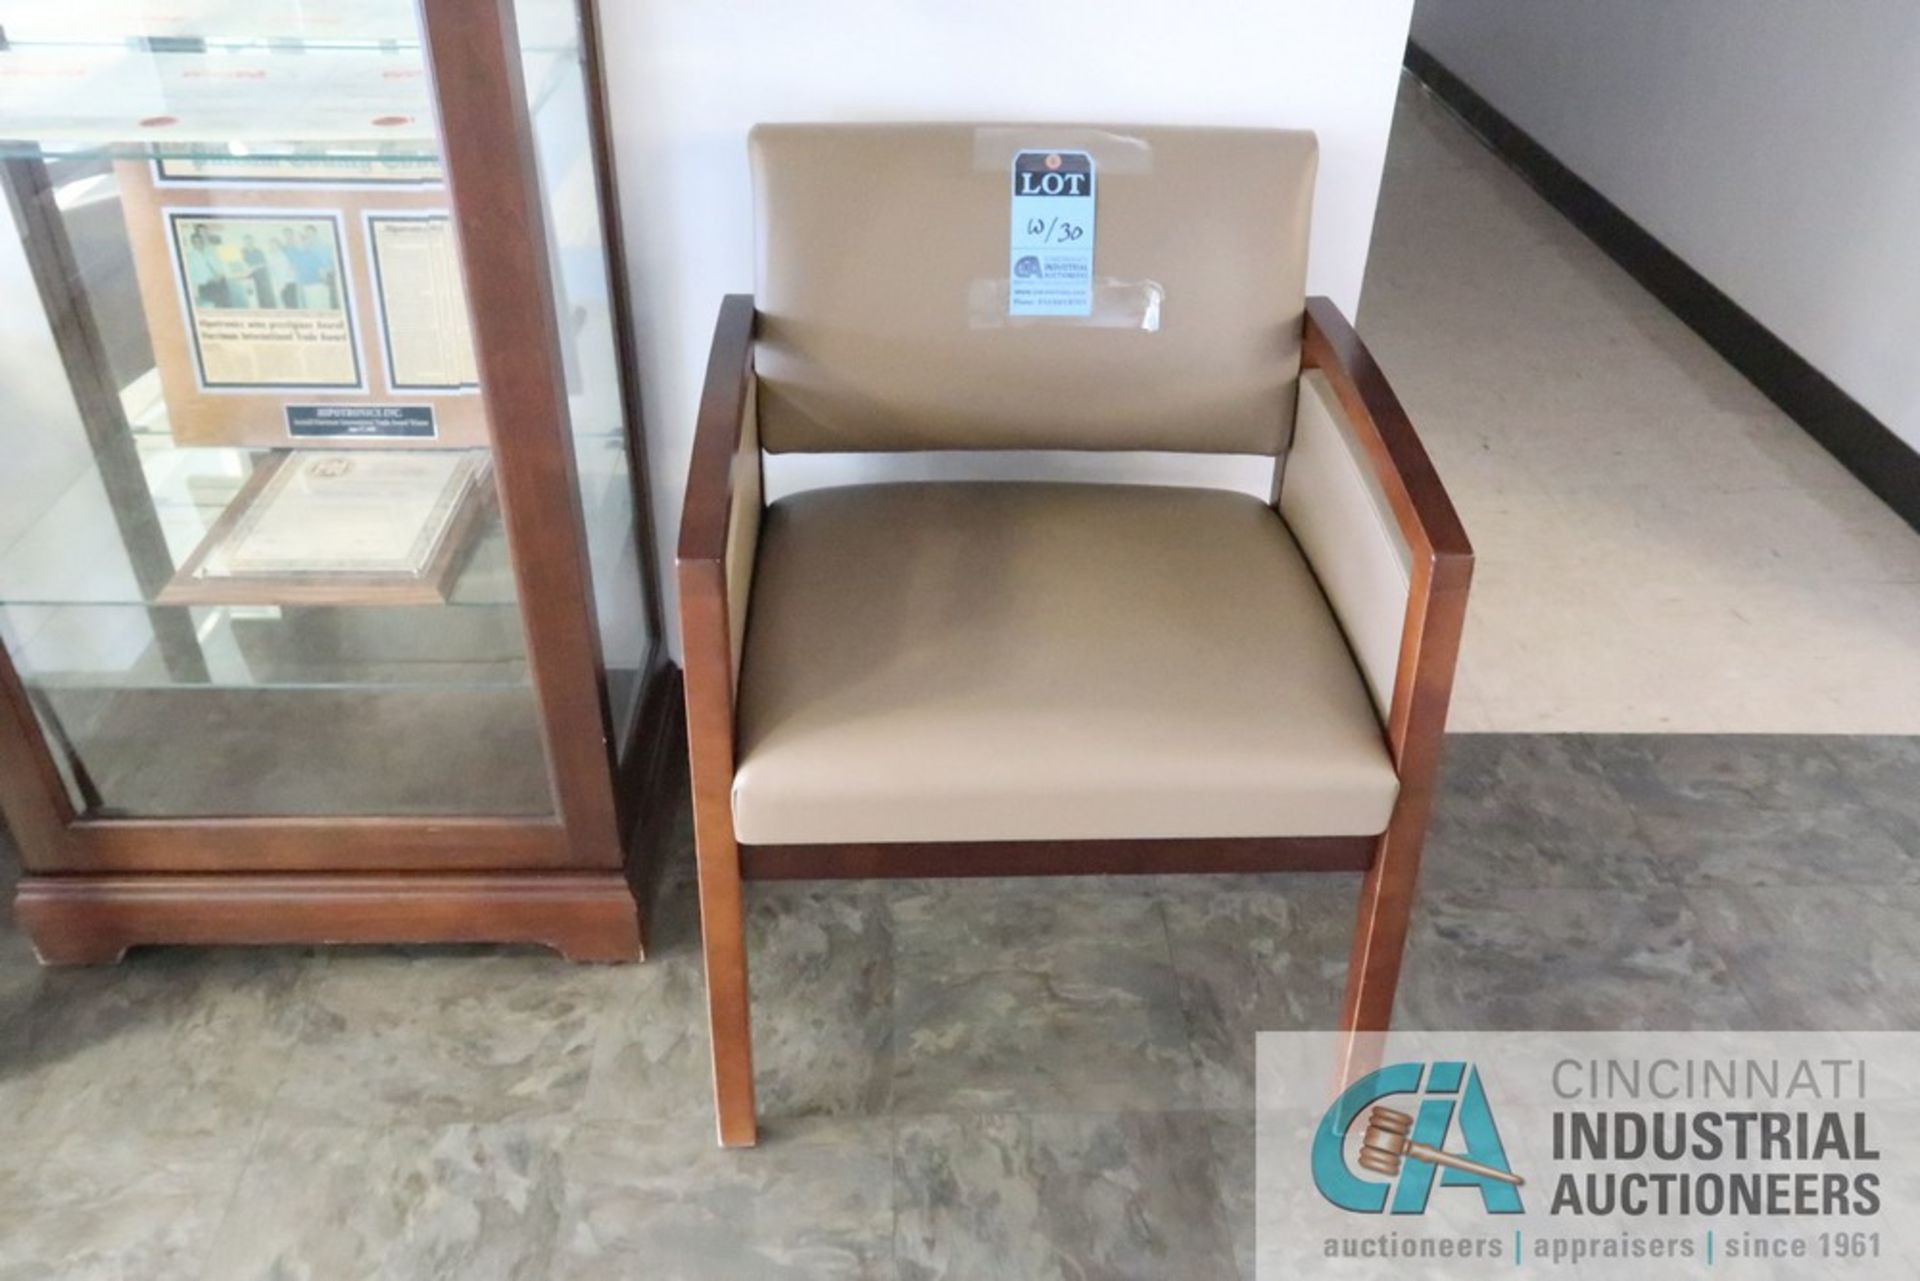 (LOT) (2) LOBBY CHAIRS LEATHER, (1) WOOD AND GLASS, DISPLAY CABINET **NO CONTENTS** - Image 2 of 4